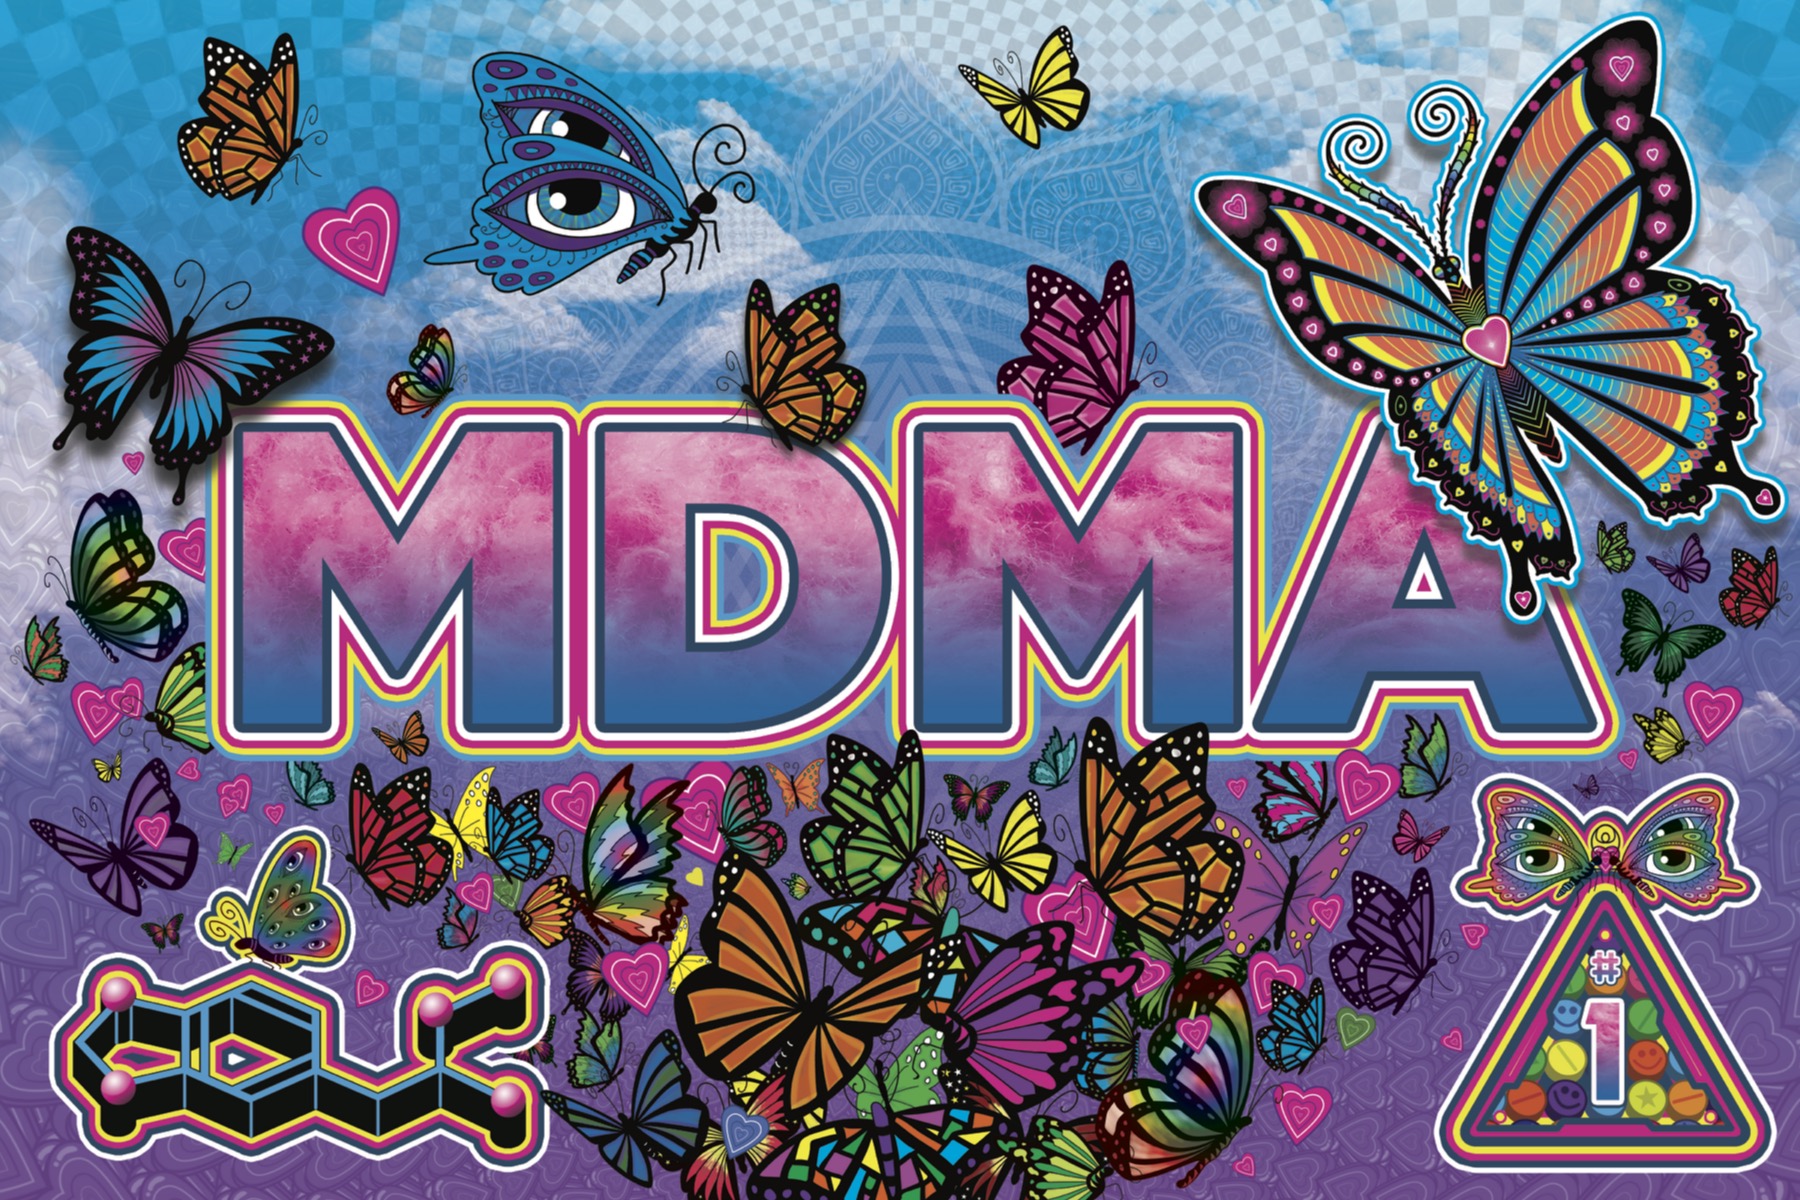 The front of the DanceSafe MDMA card, with butterflies and eyeballs in the background.